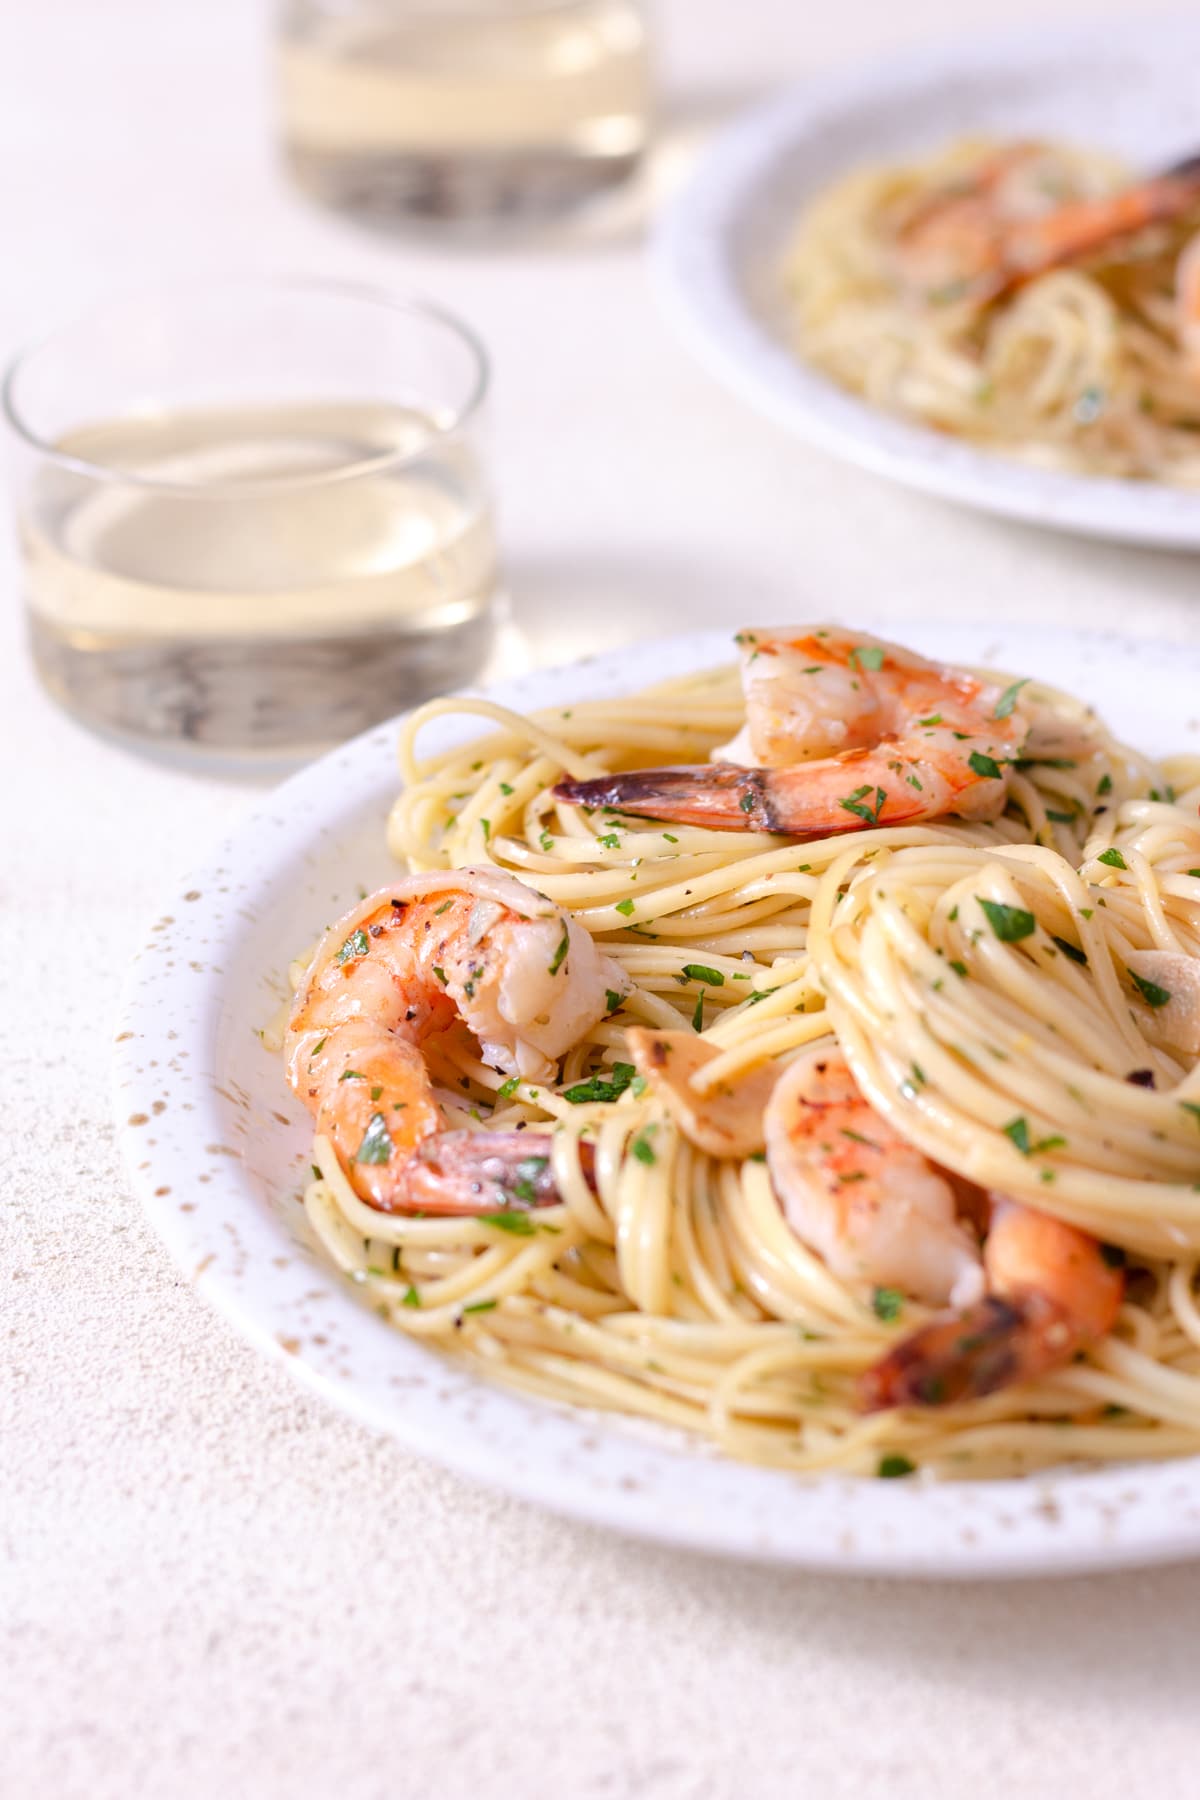 Angled view of a plate of shrimp pasta with wine glasses and another plate in the background on a white plaster surface.